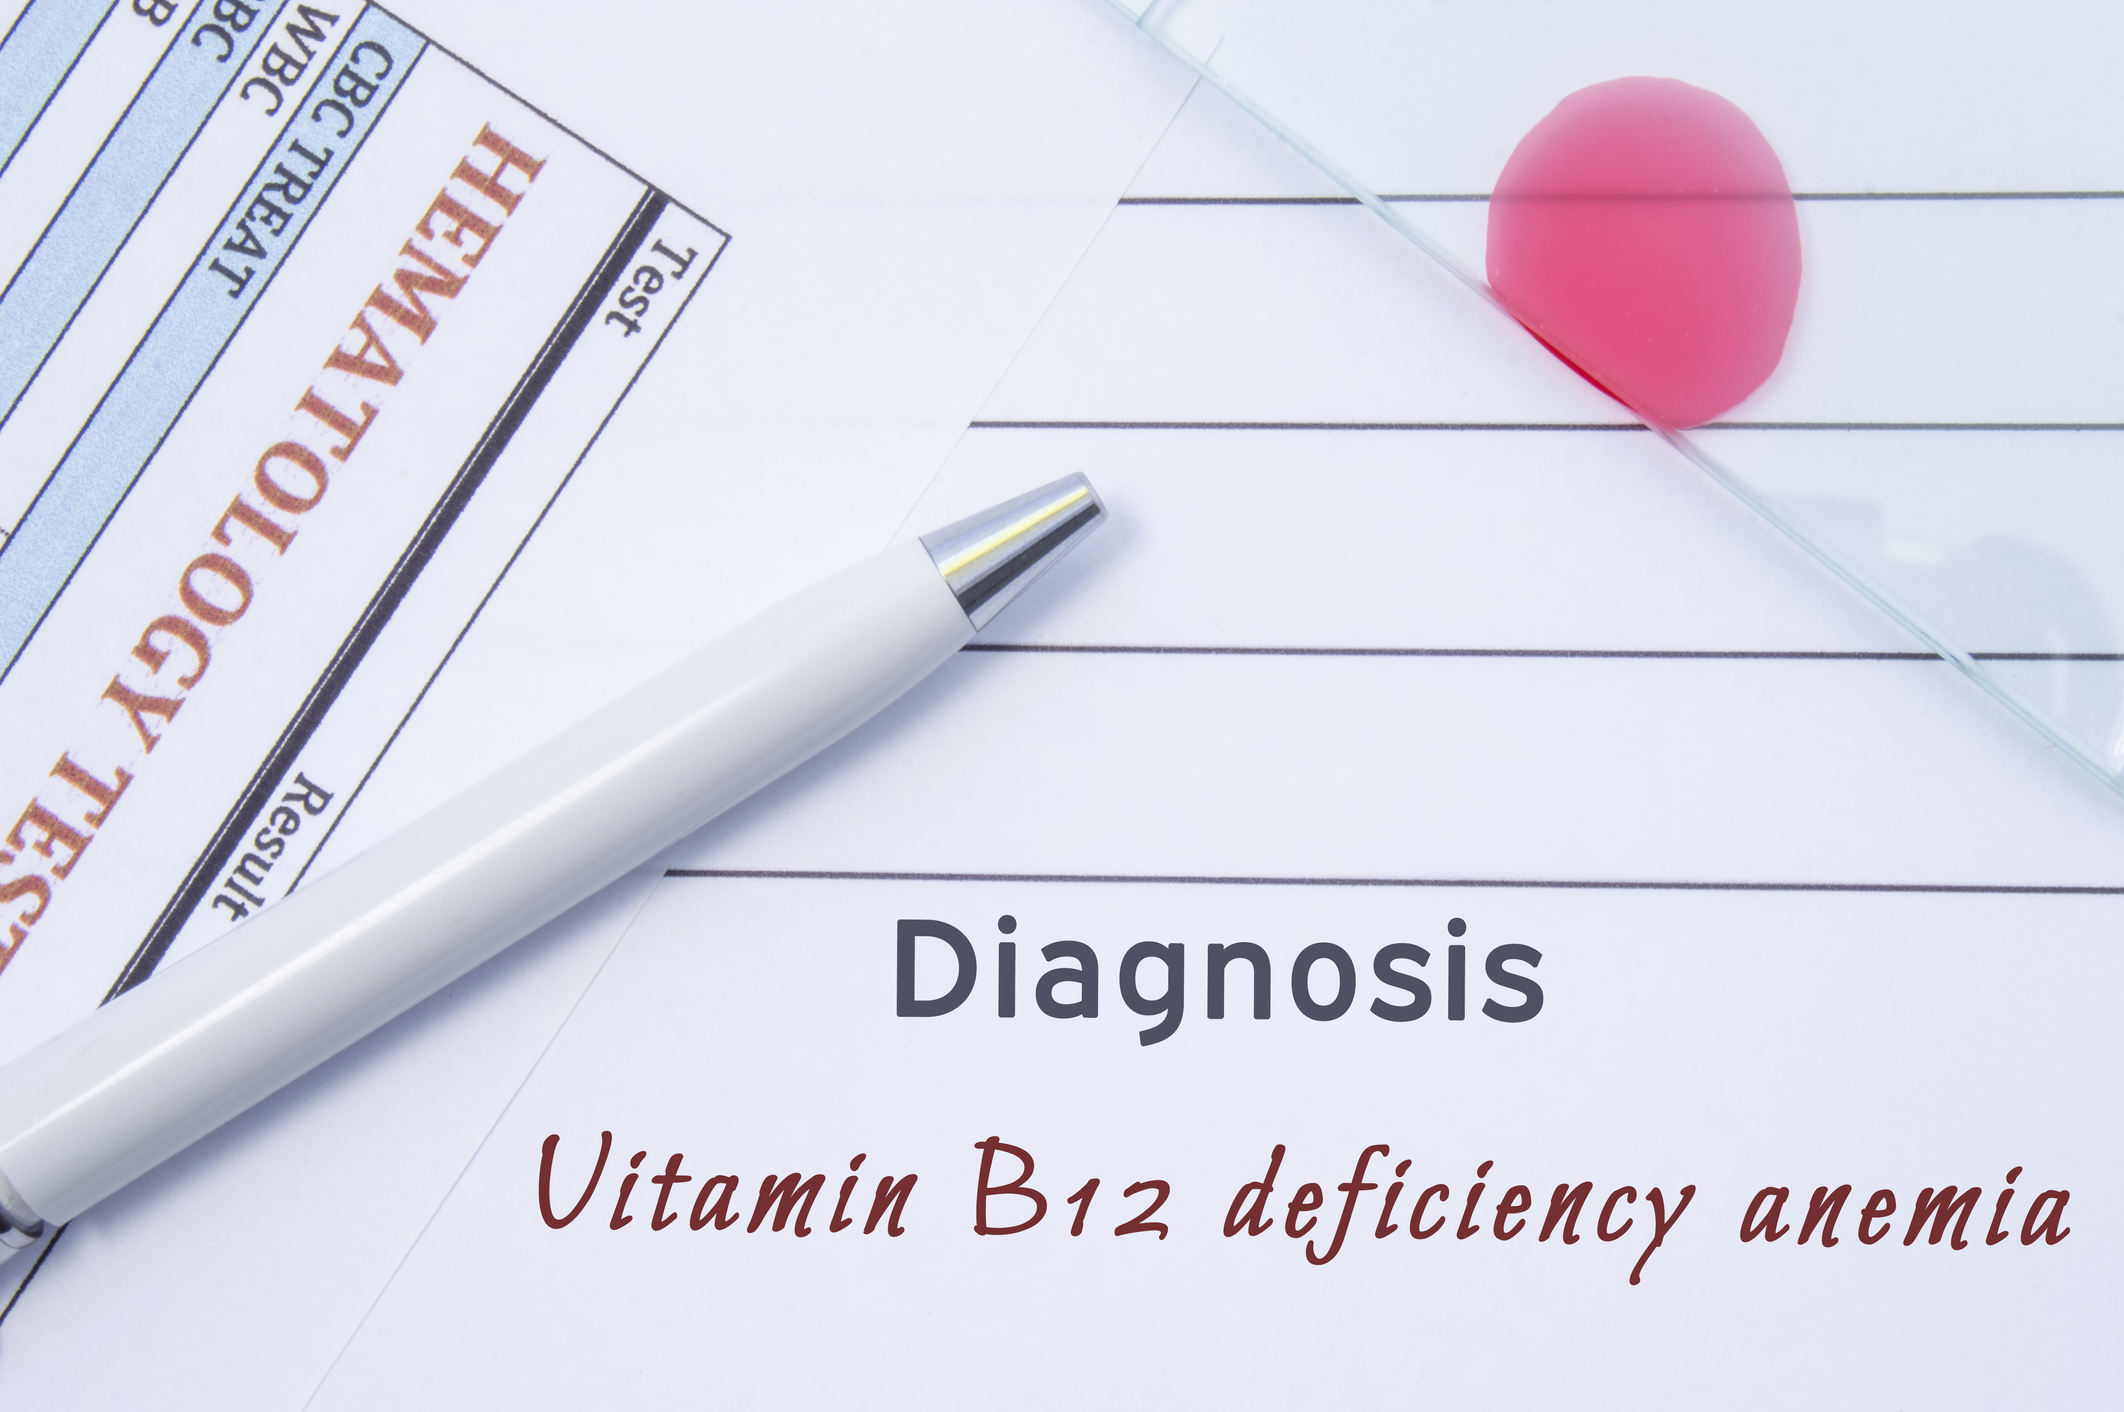 Vitamin B12 deficiency can cause pernicious anemia.